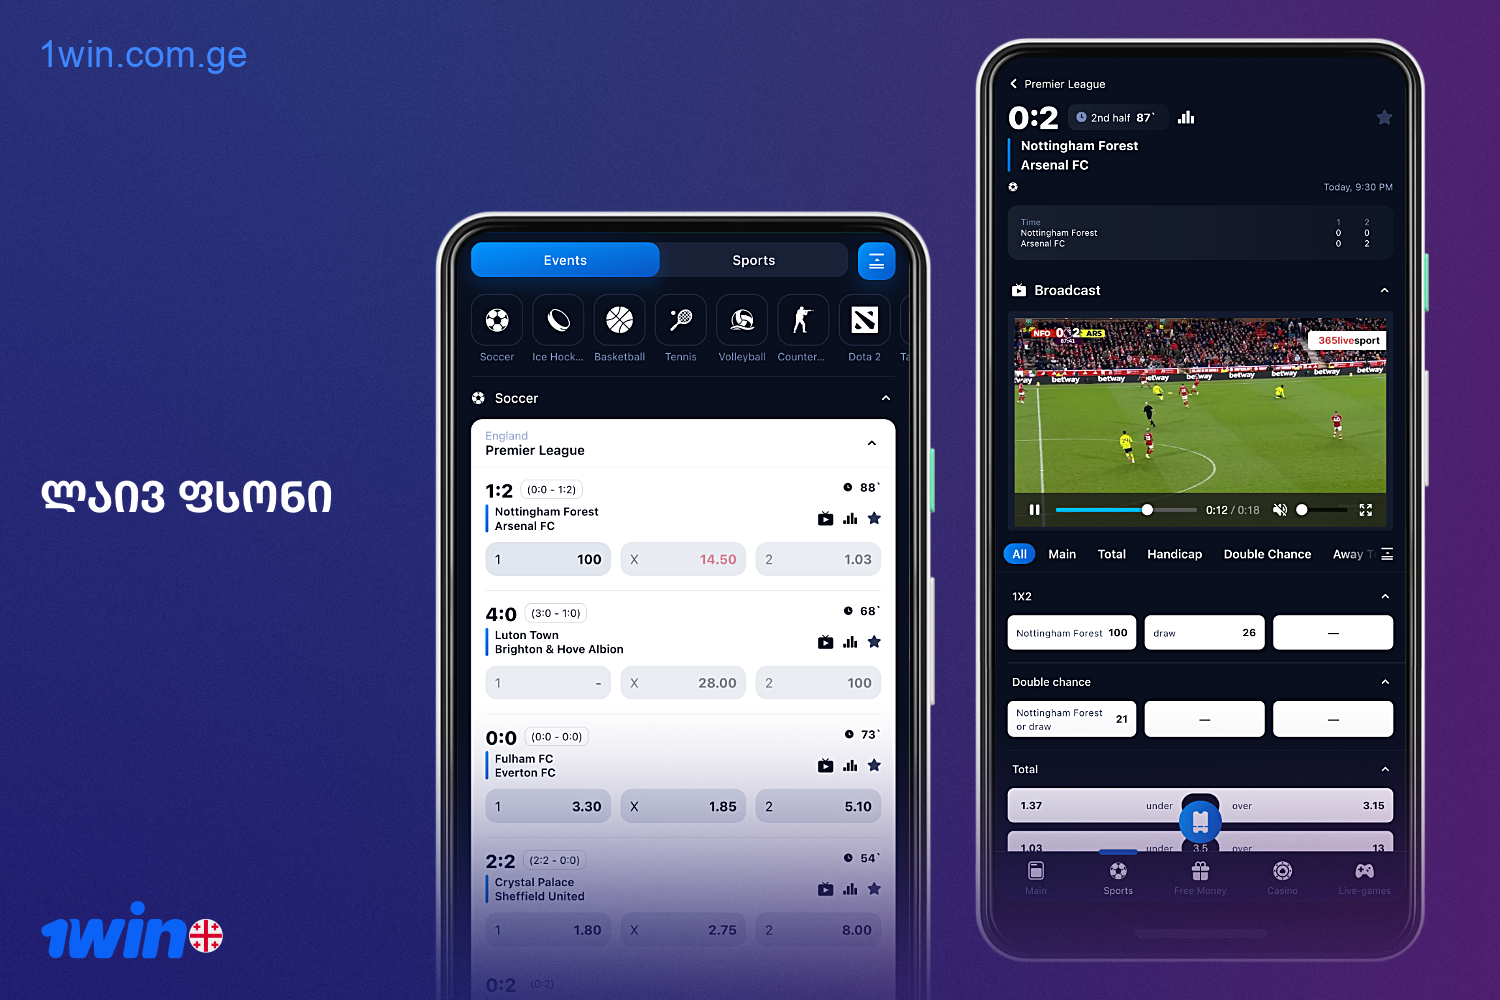 On the website and in the 1win app, players have access to betting on live matches, including live broadcasts